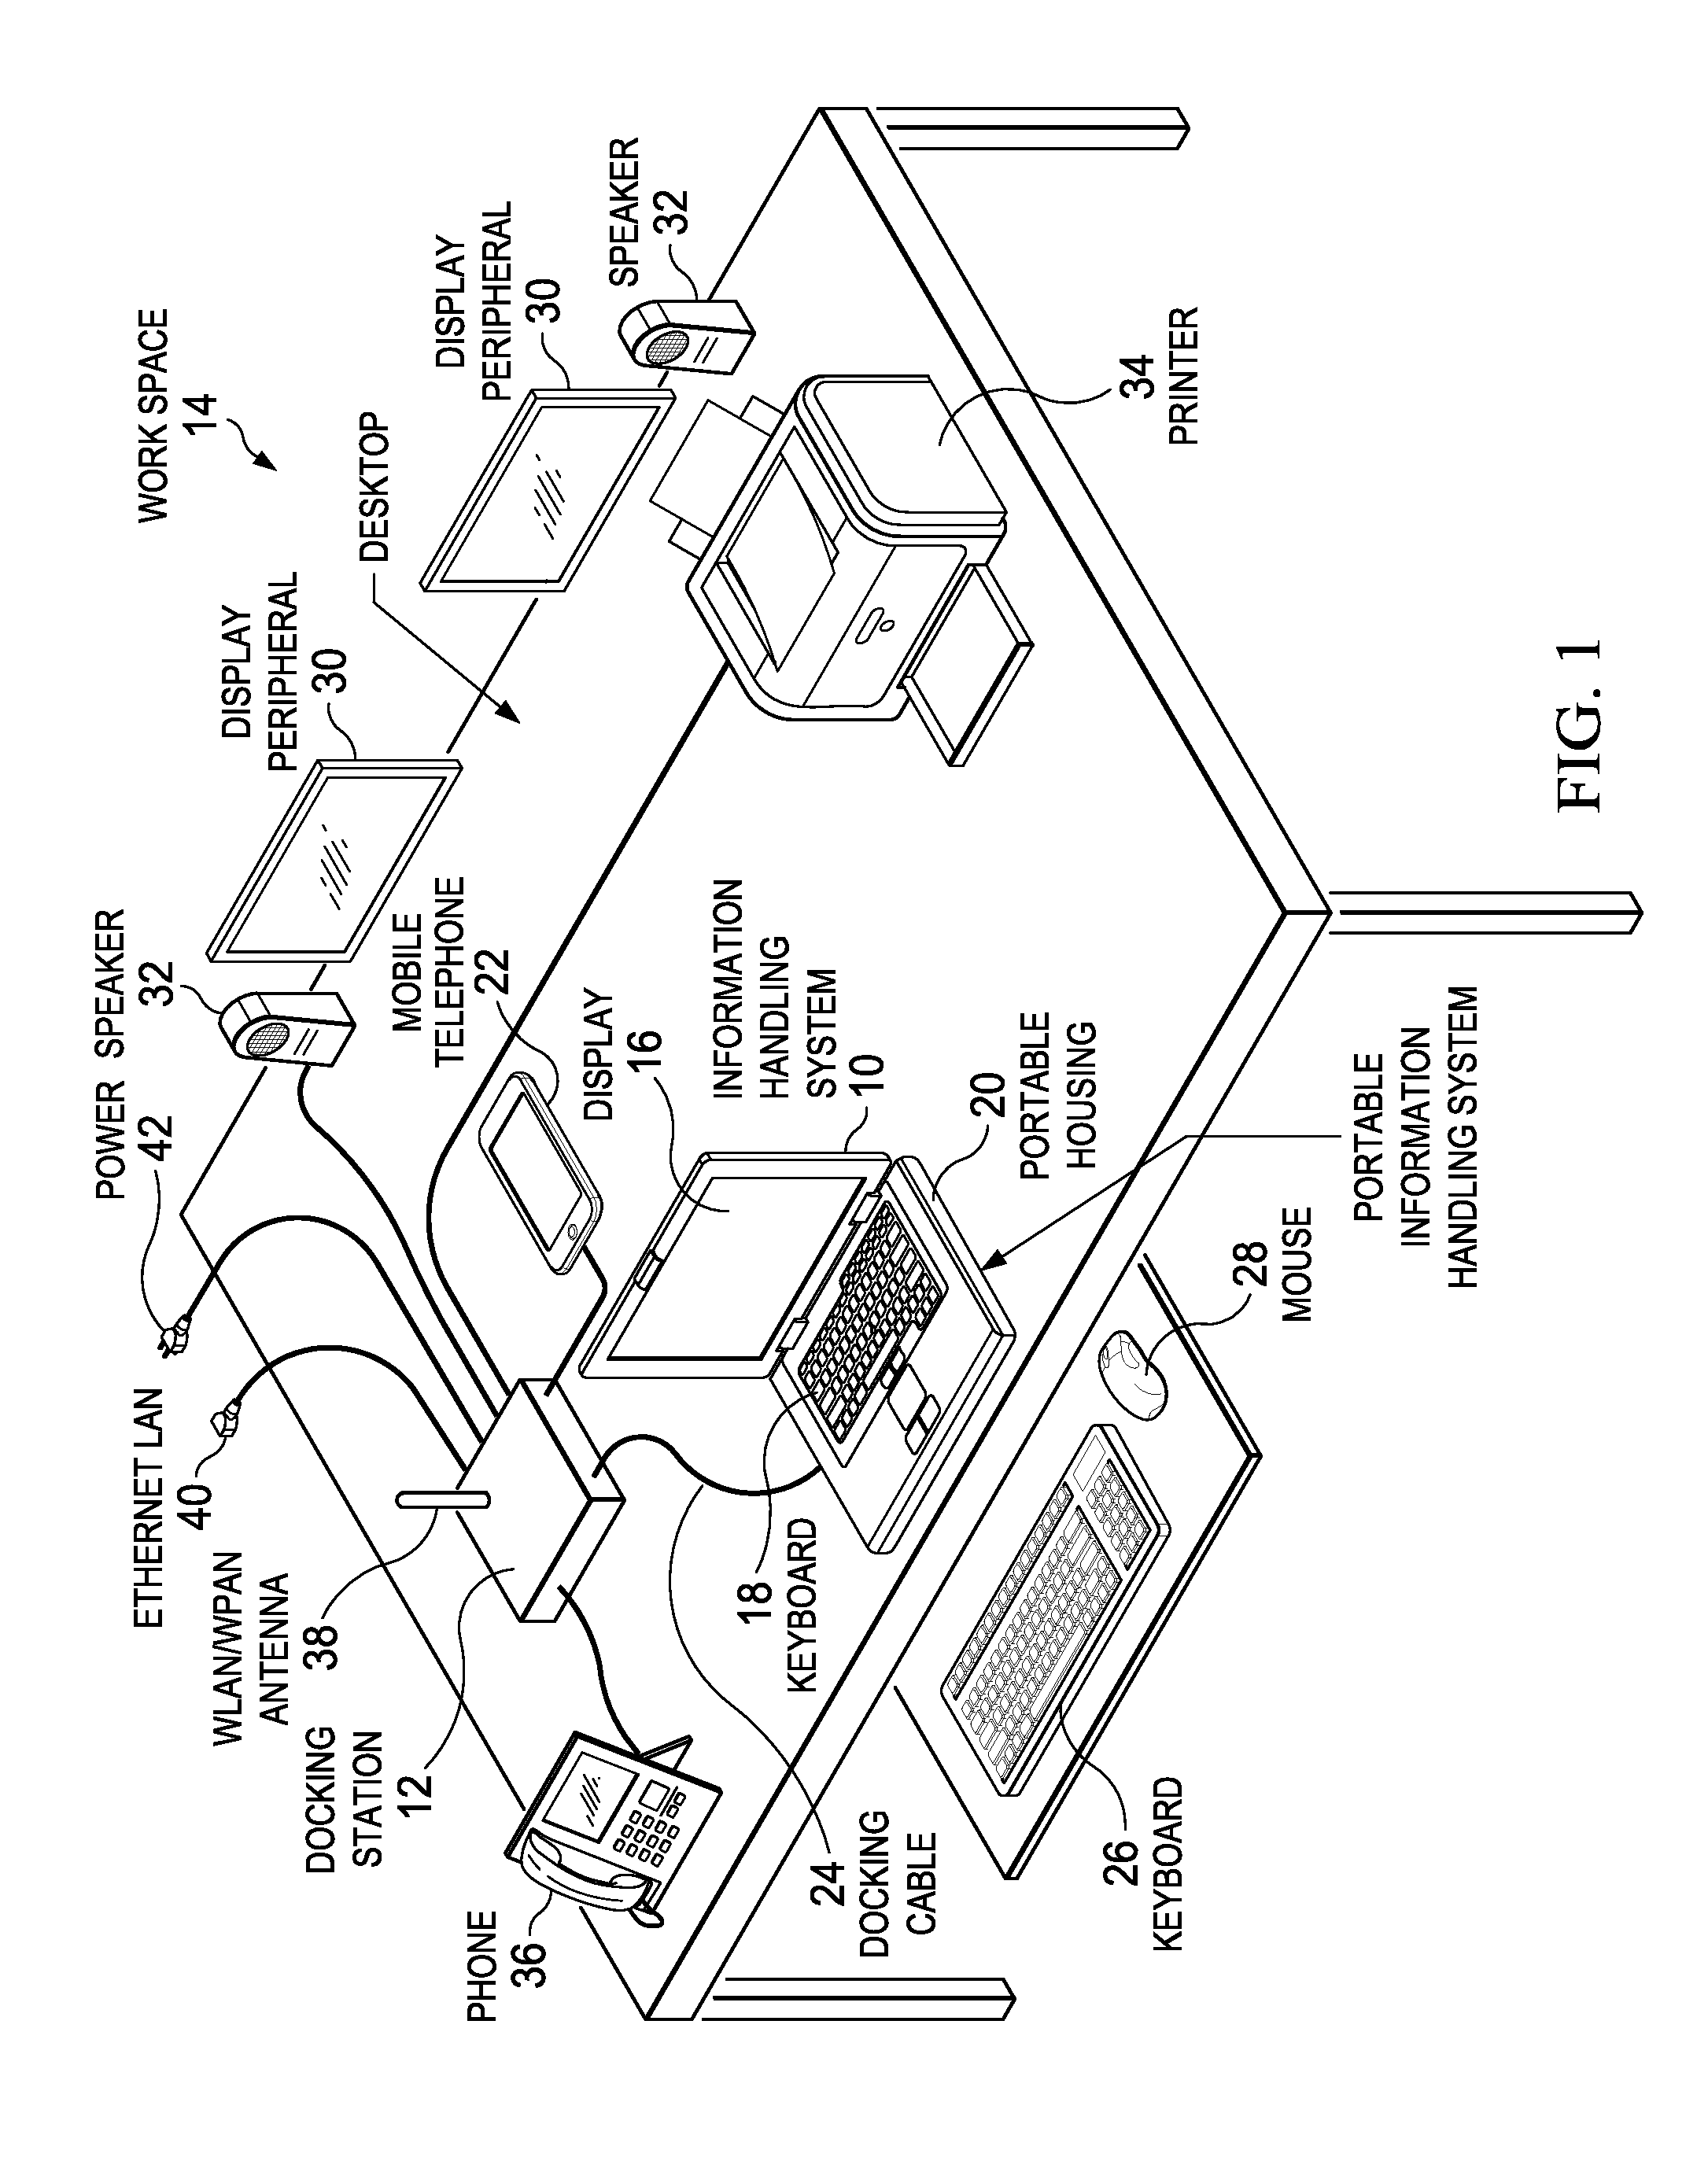 Information Handling System Docking with Coordinated Power and Data Communication